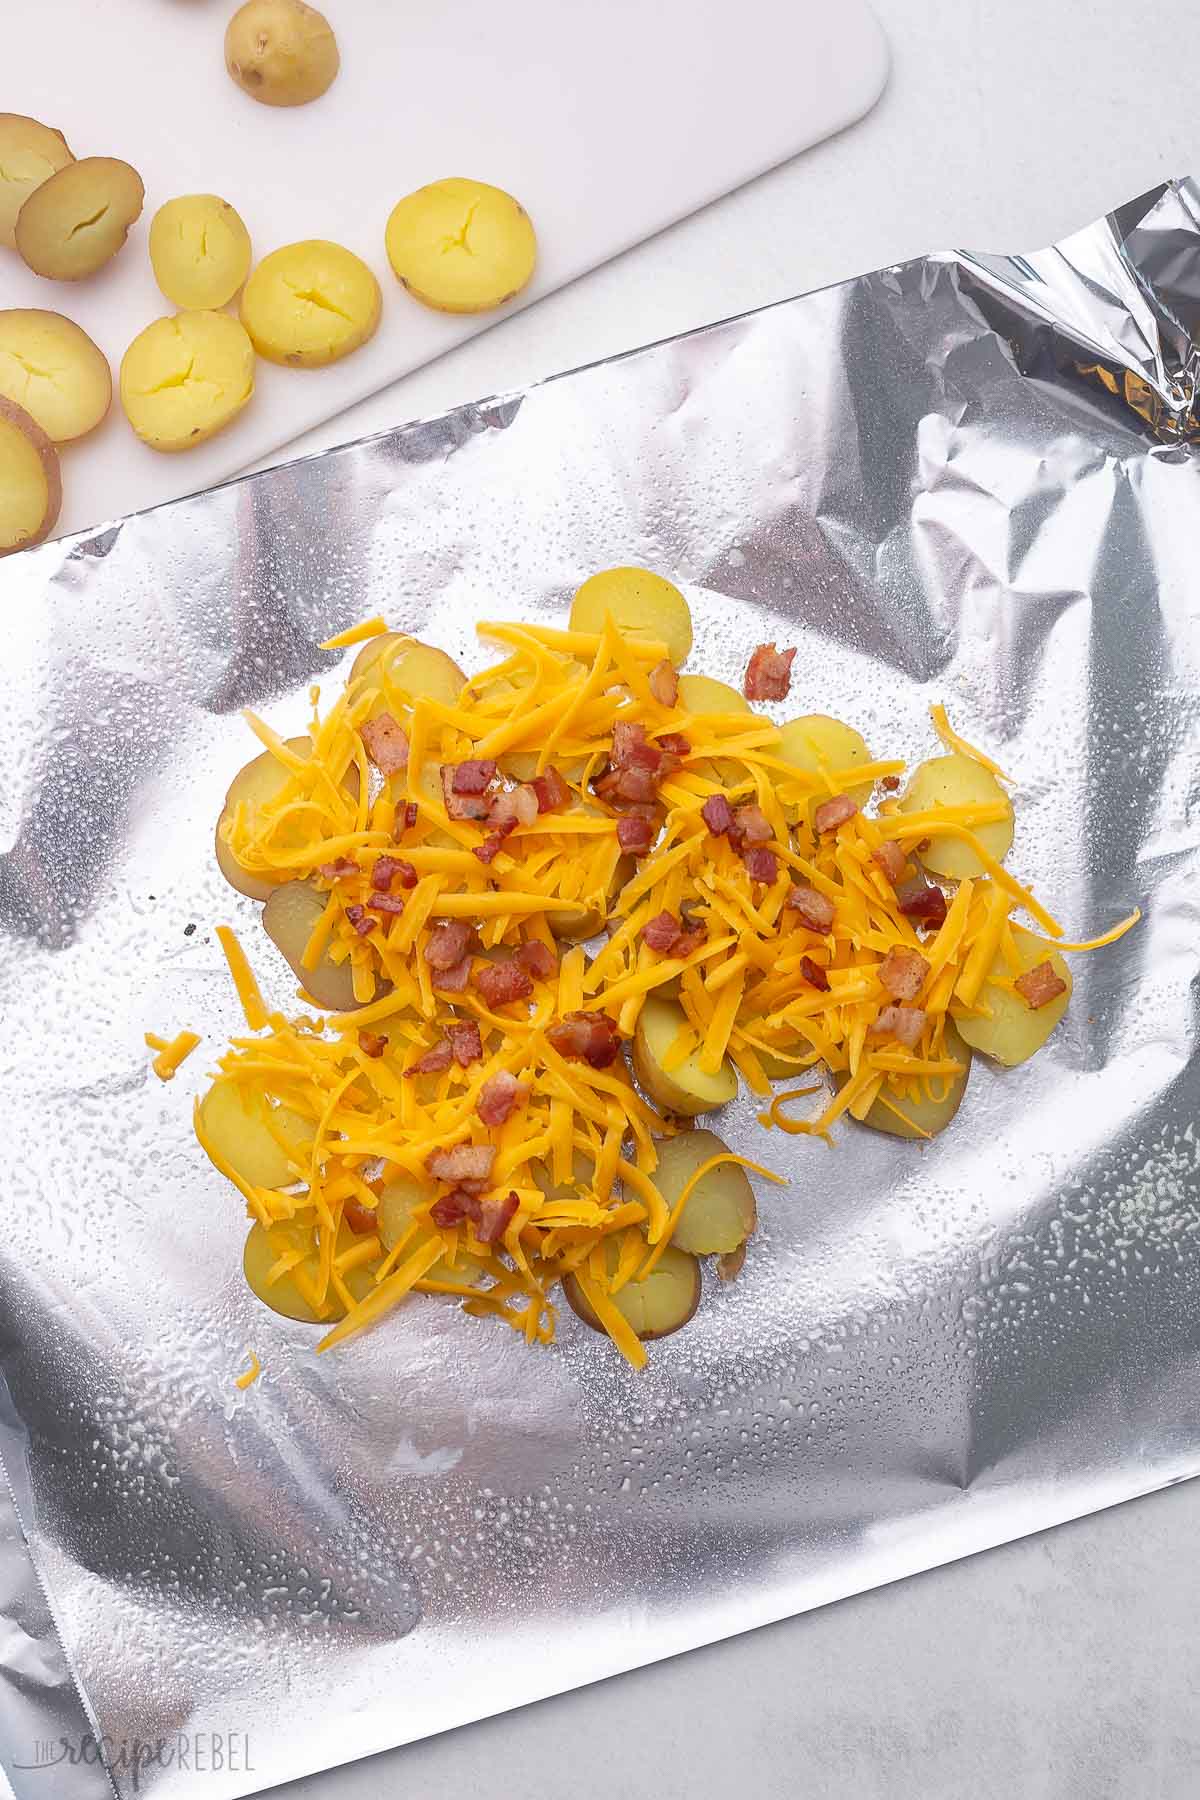 aluminum foil with sliced potatoes covered in shredded cheese and bacon bits.